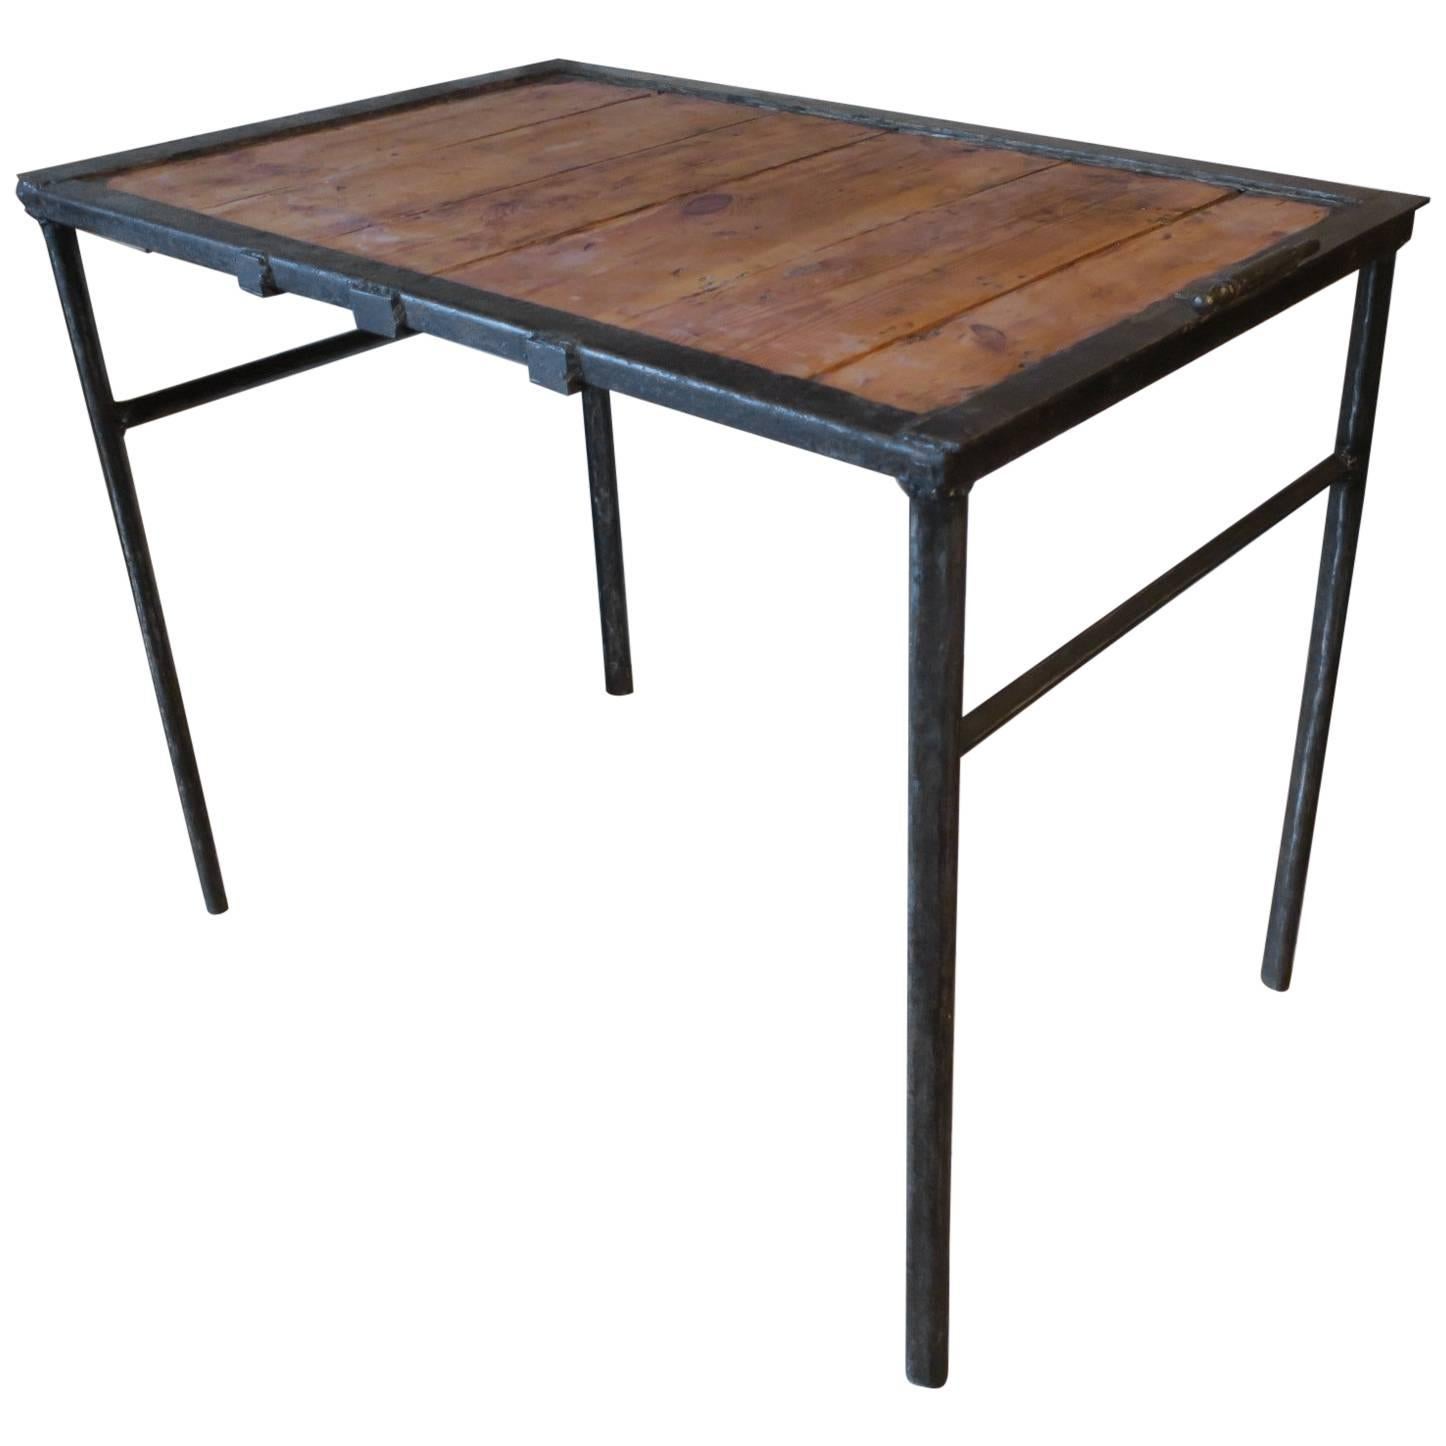 Unique Vintage Industrial Iron and Wood Table with Character For Sale